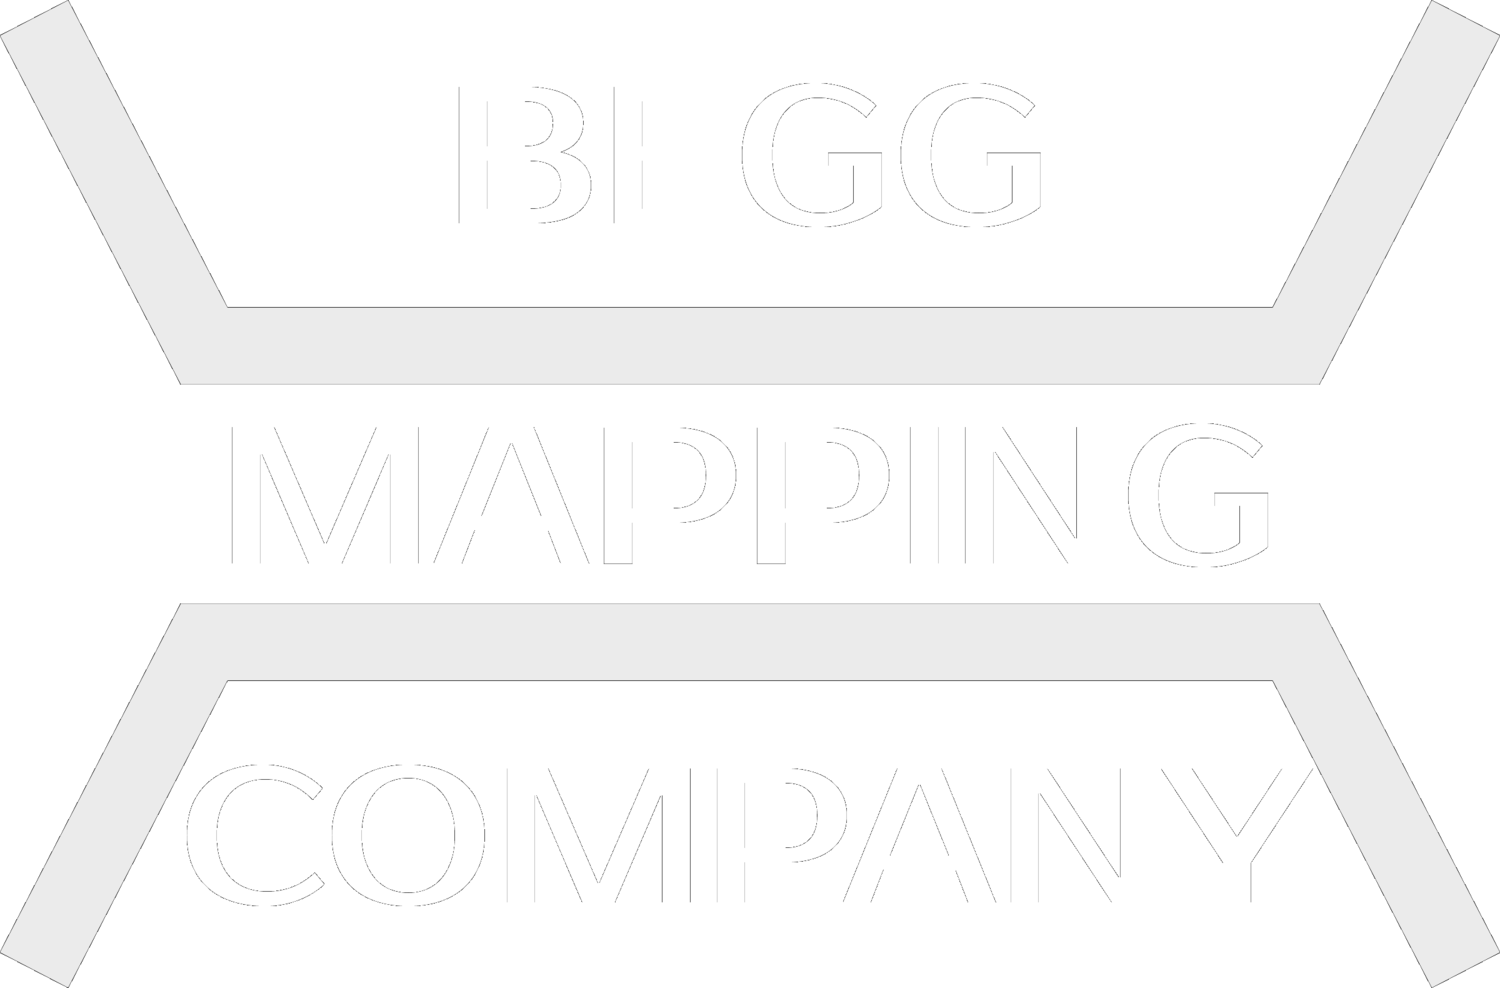 Begg Mapping Company